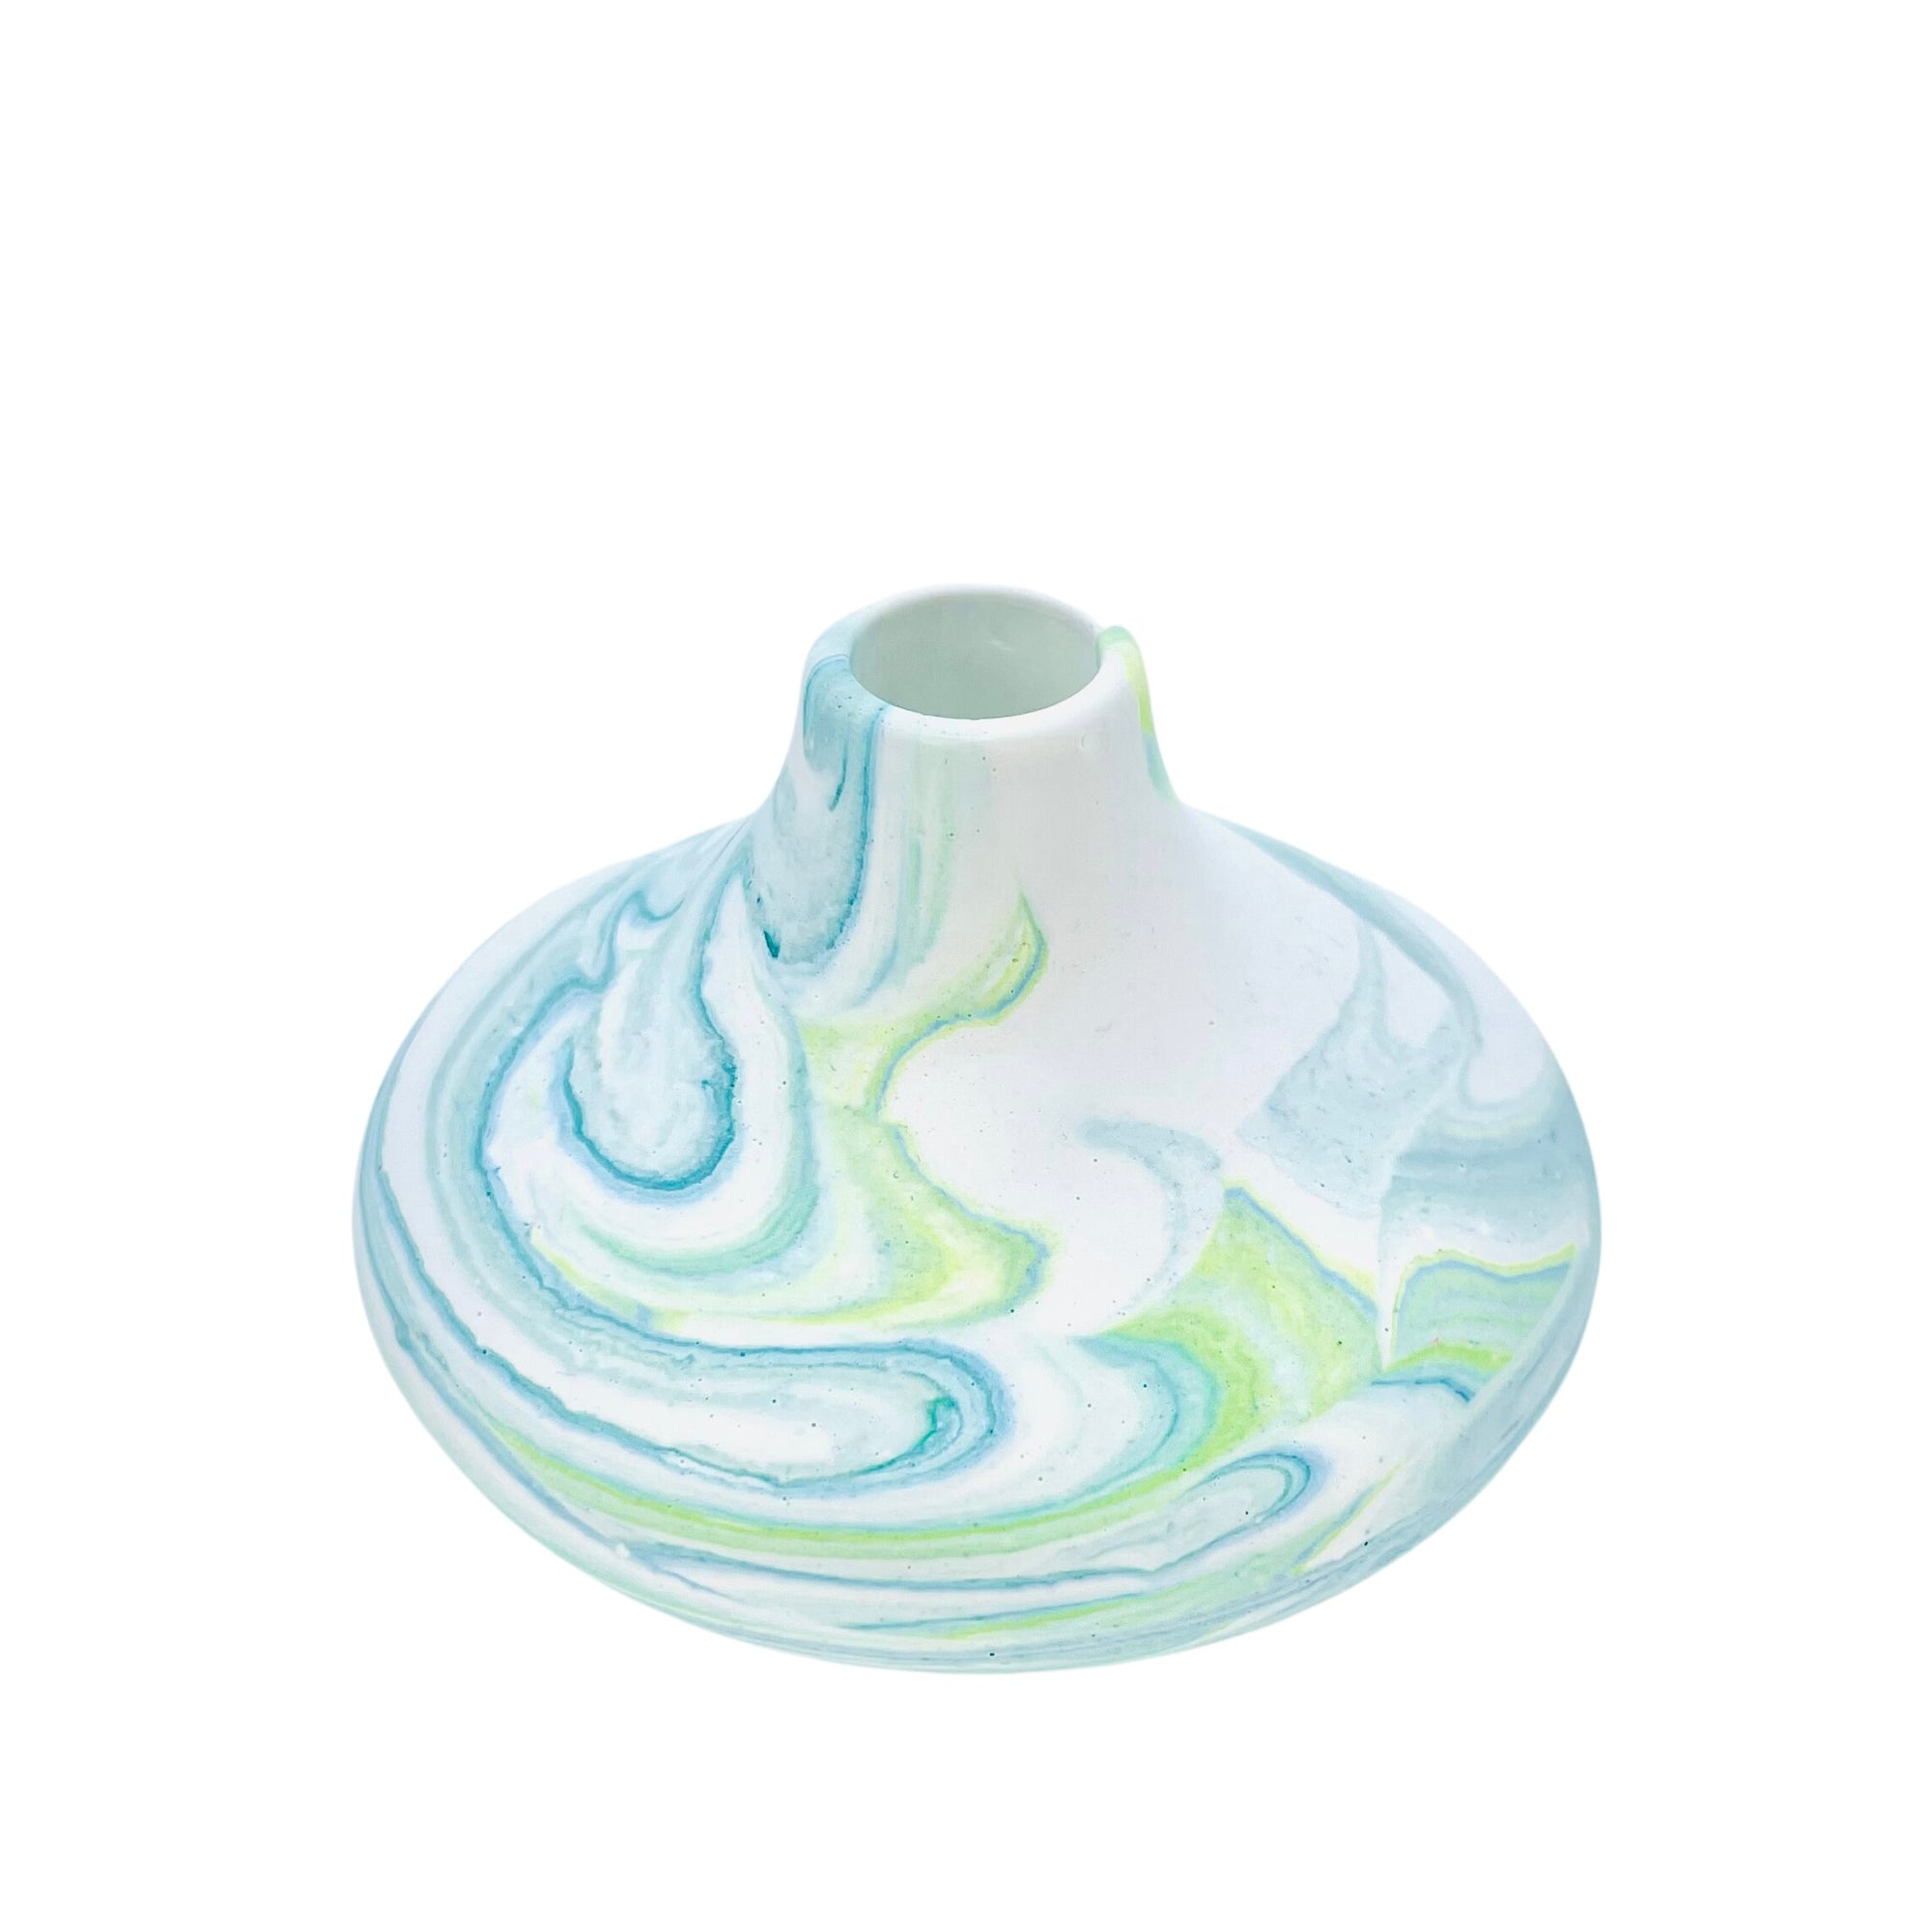 This small bulbous Jesmonite vase is marbled with turquoise and green pigment.